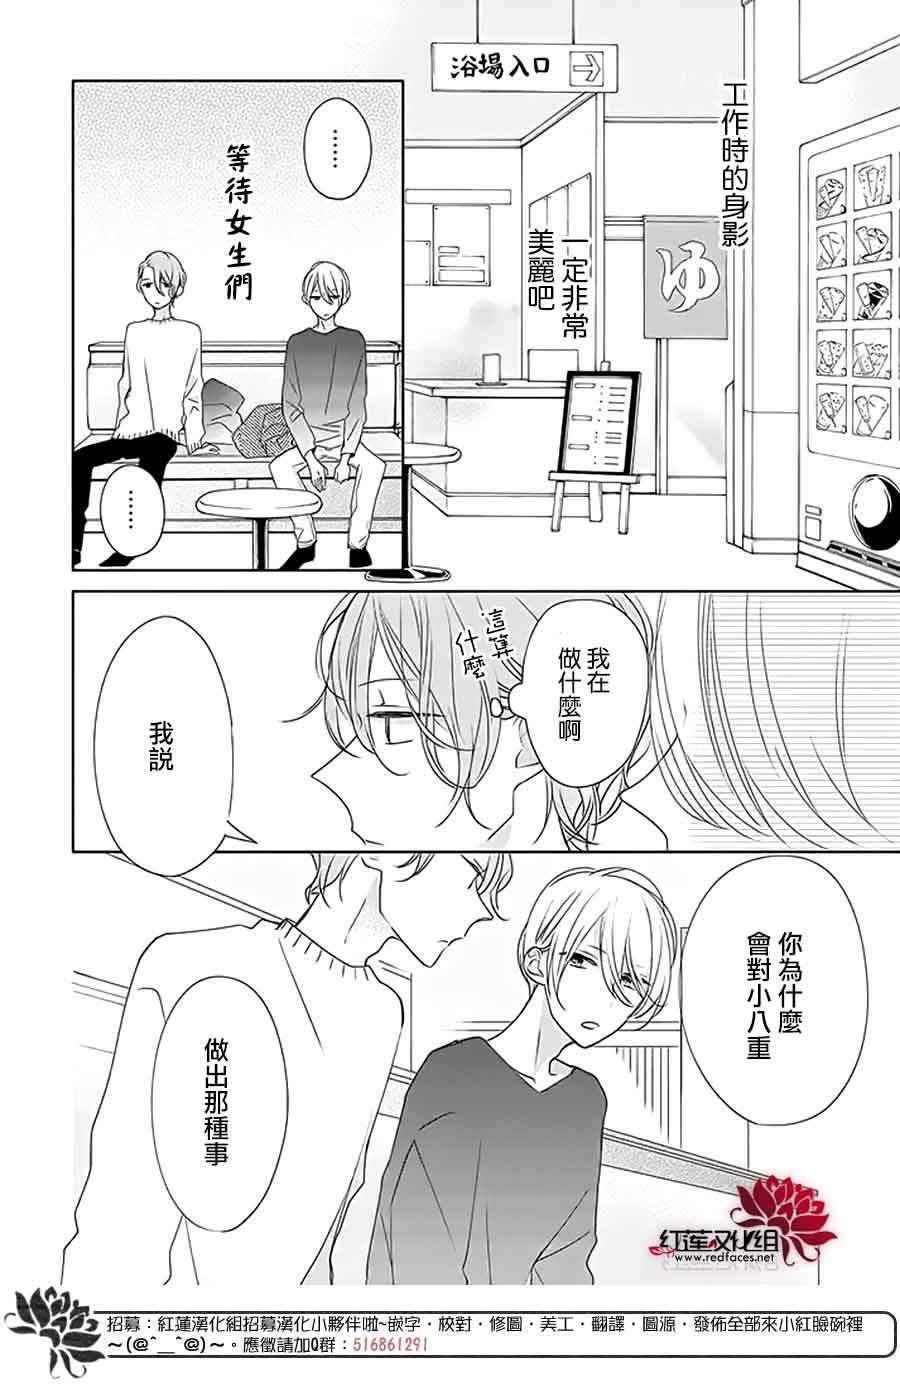 If given a second chance - 26話 - 2